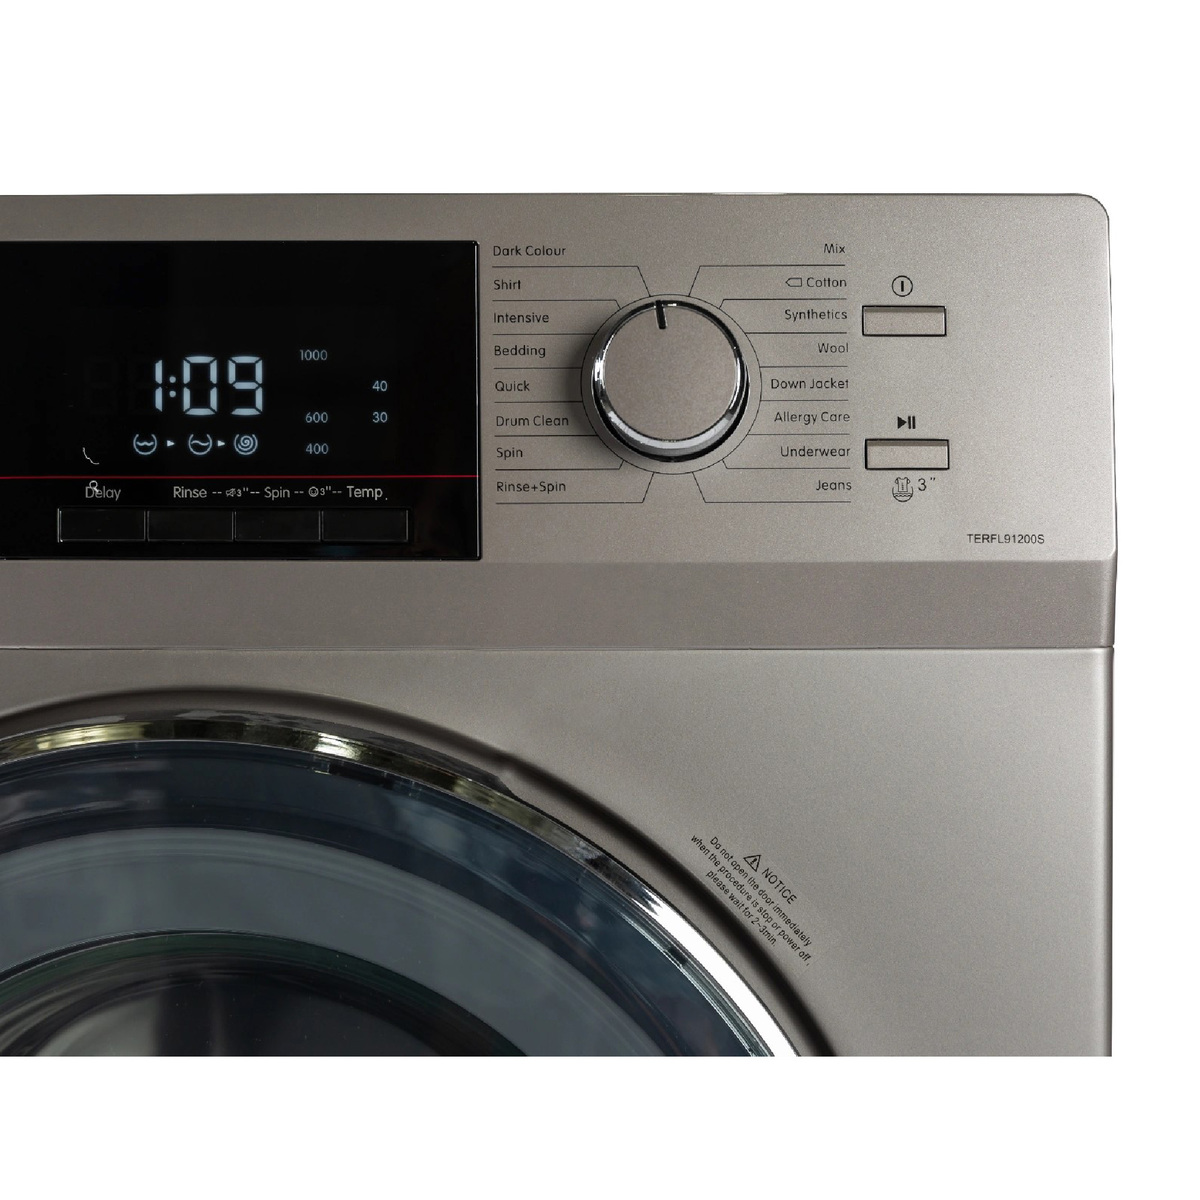 Terim Full Automatic Front Load Washing Machine, 8.5 Kg, 1200 RPM, Silver, TERFL91200S